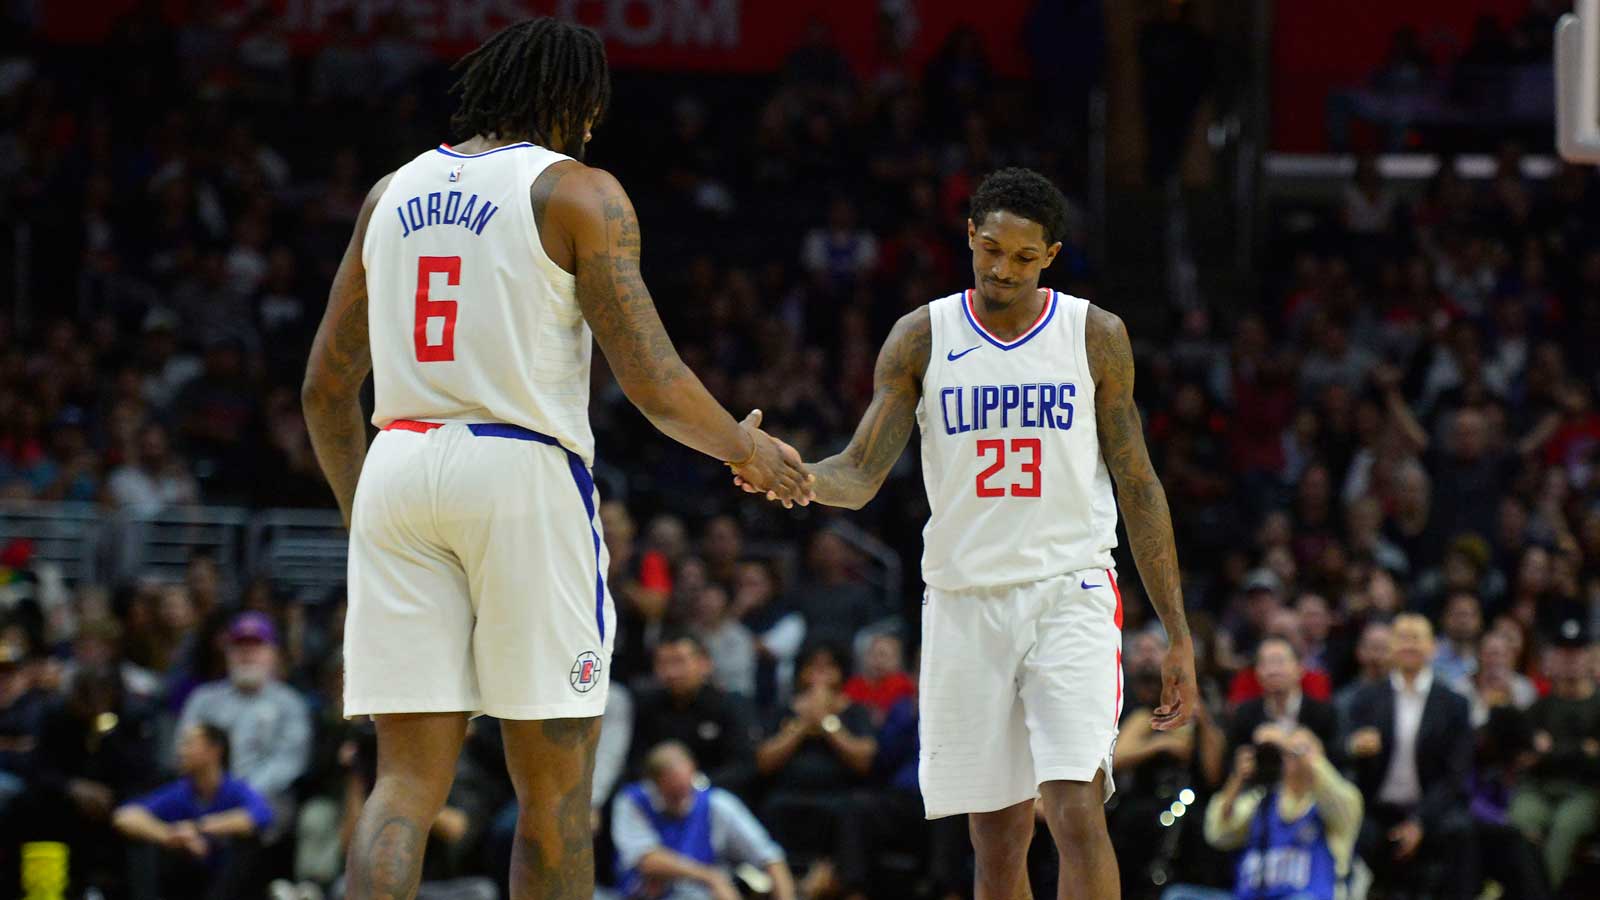 PREVIEW: Clippers host Bulls as roster transition continues